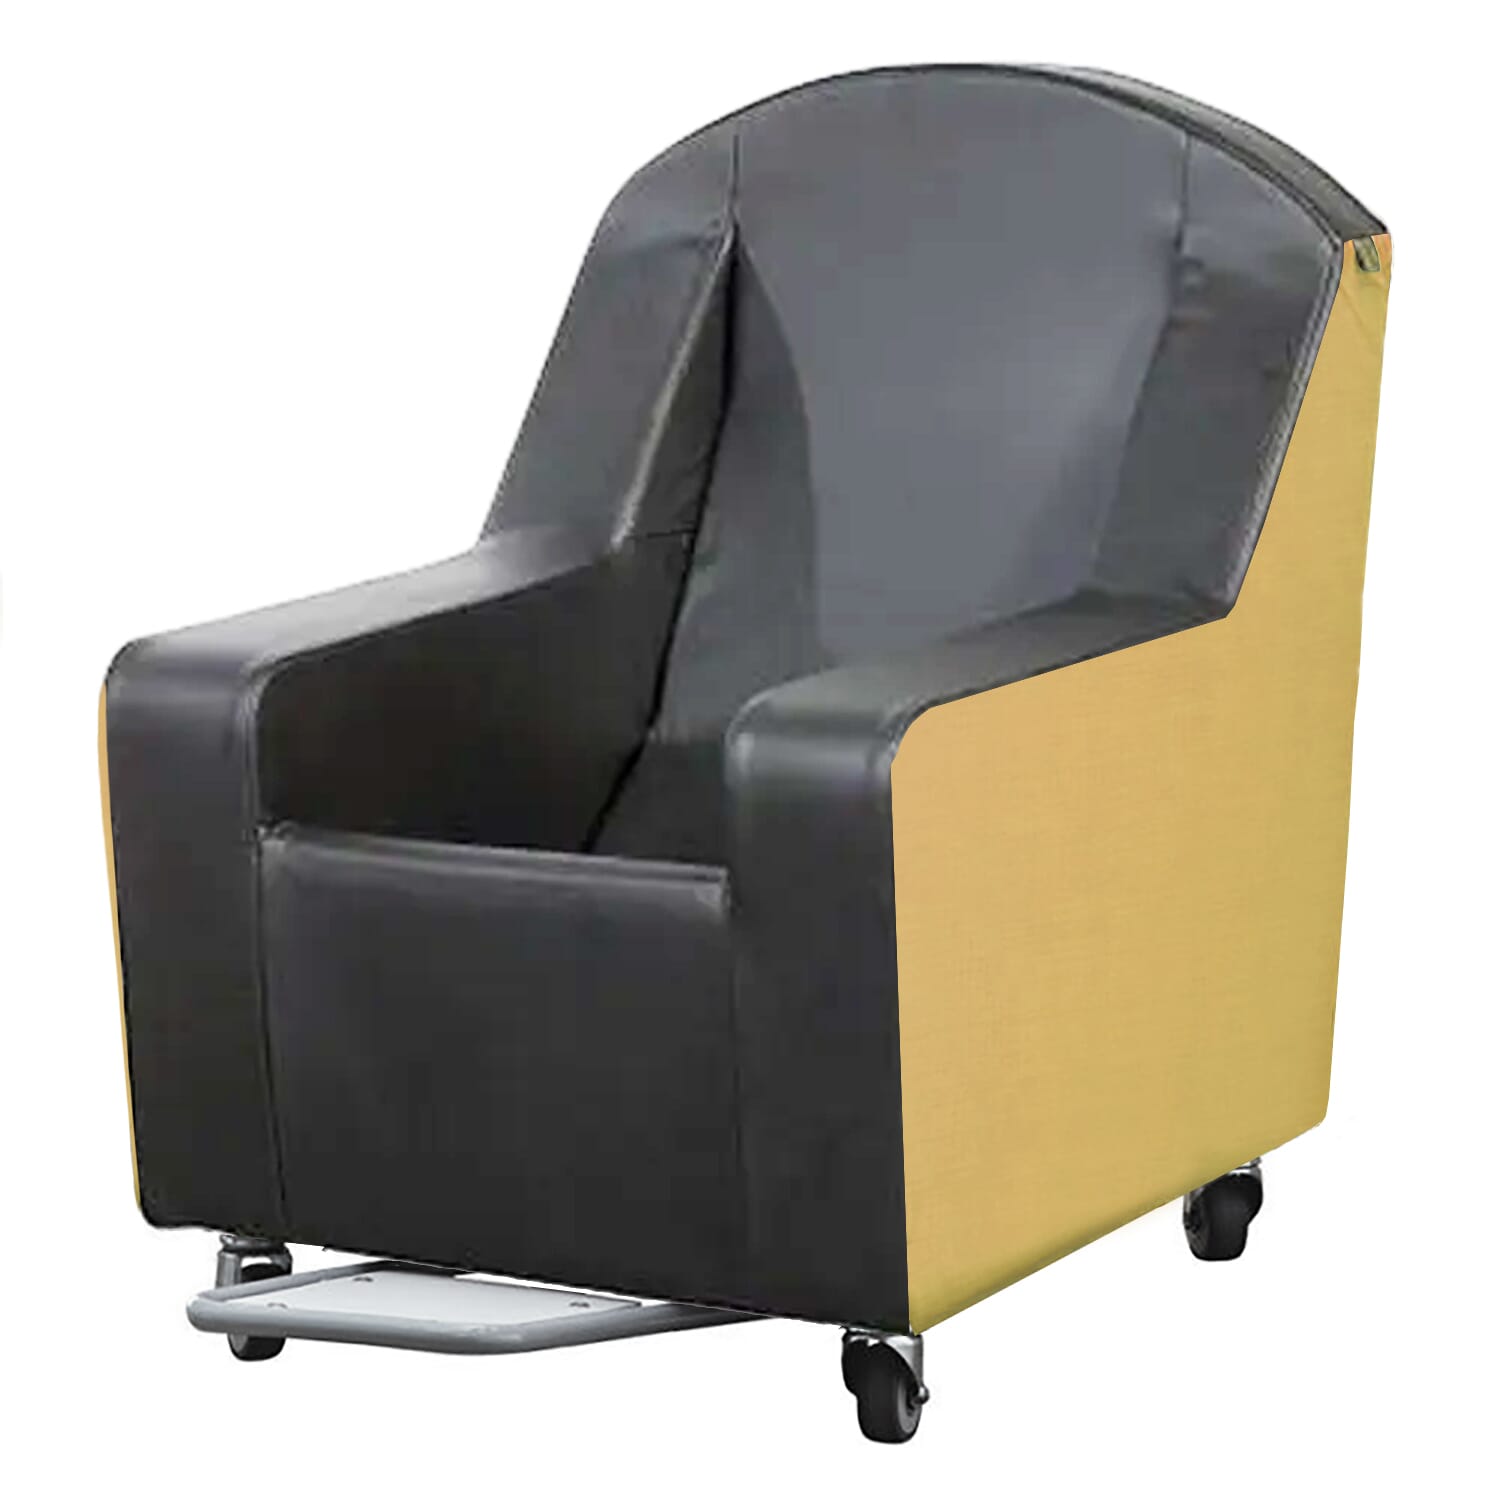 View Kirton Stirling Chair with Sliding Footrest Graphite Dartex Fawley Vinyl information